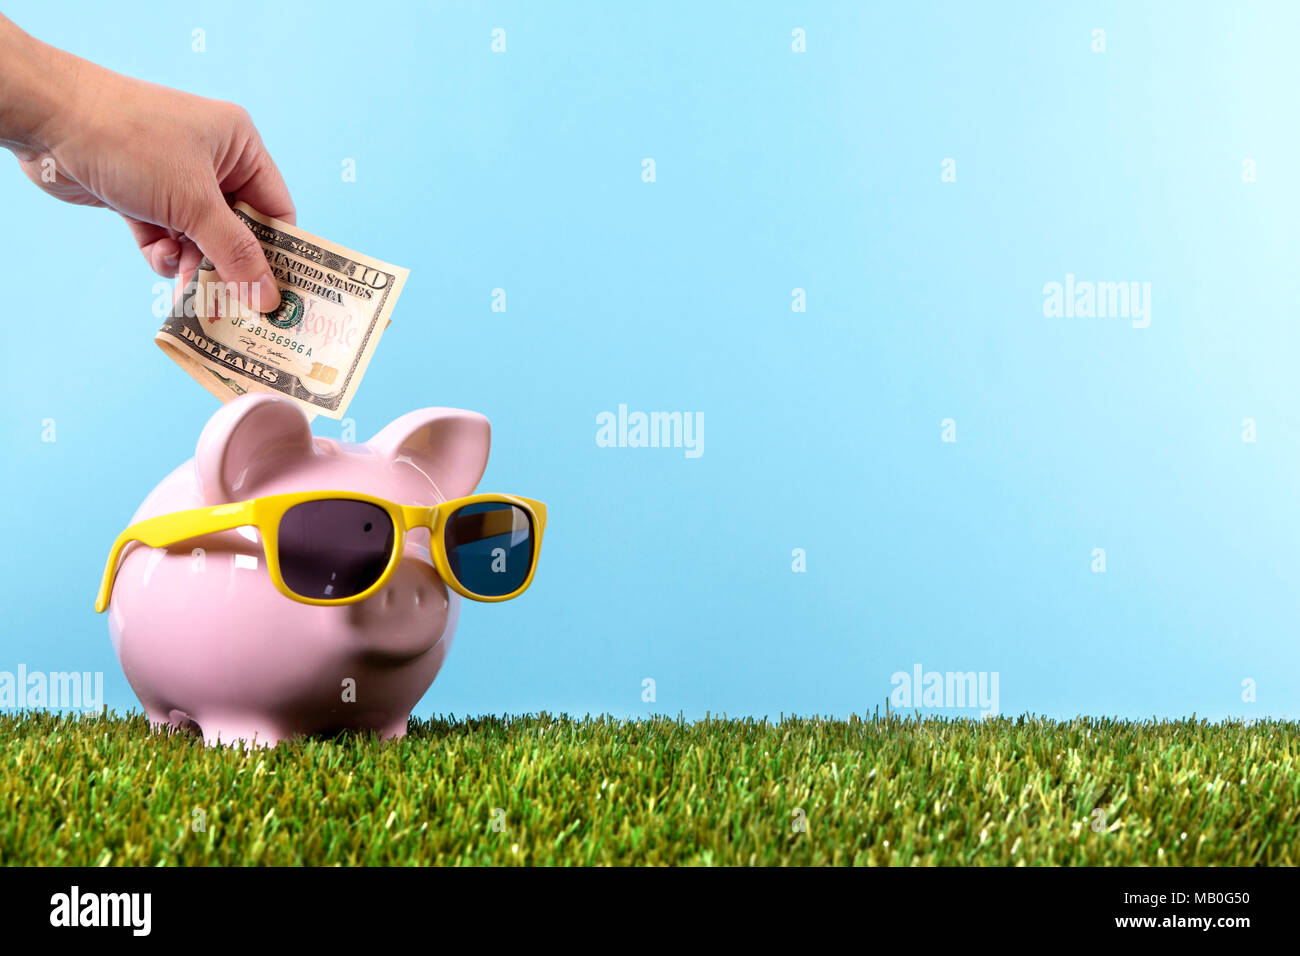 Hand putting a ten dollar bill into a pink piggy bank, with sunglasses, grass and blue sky Stock Photo